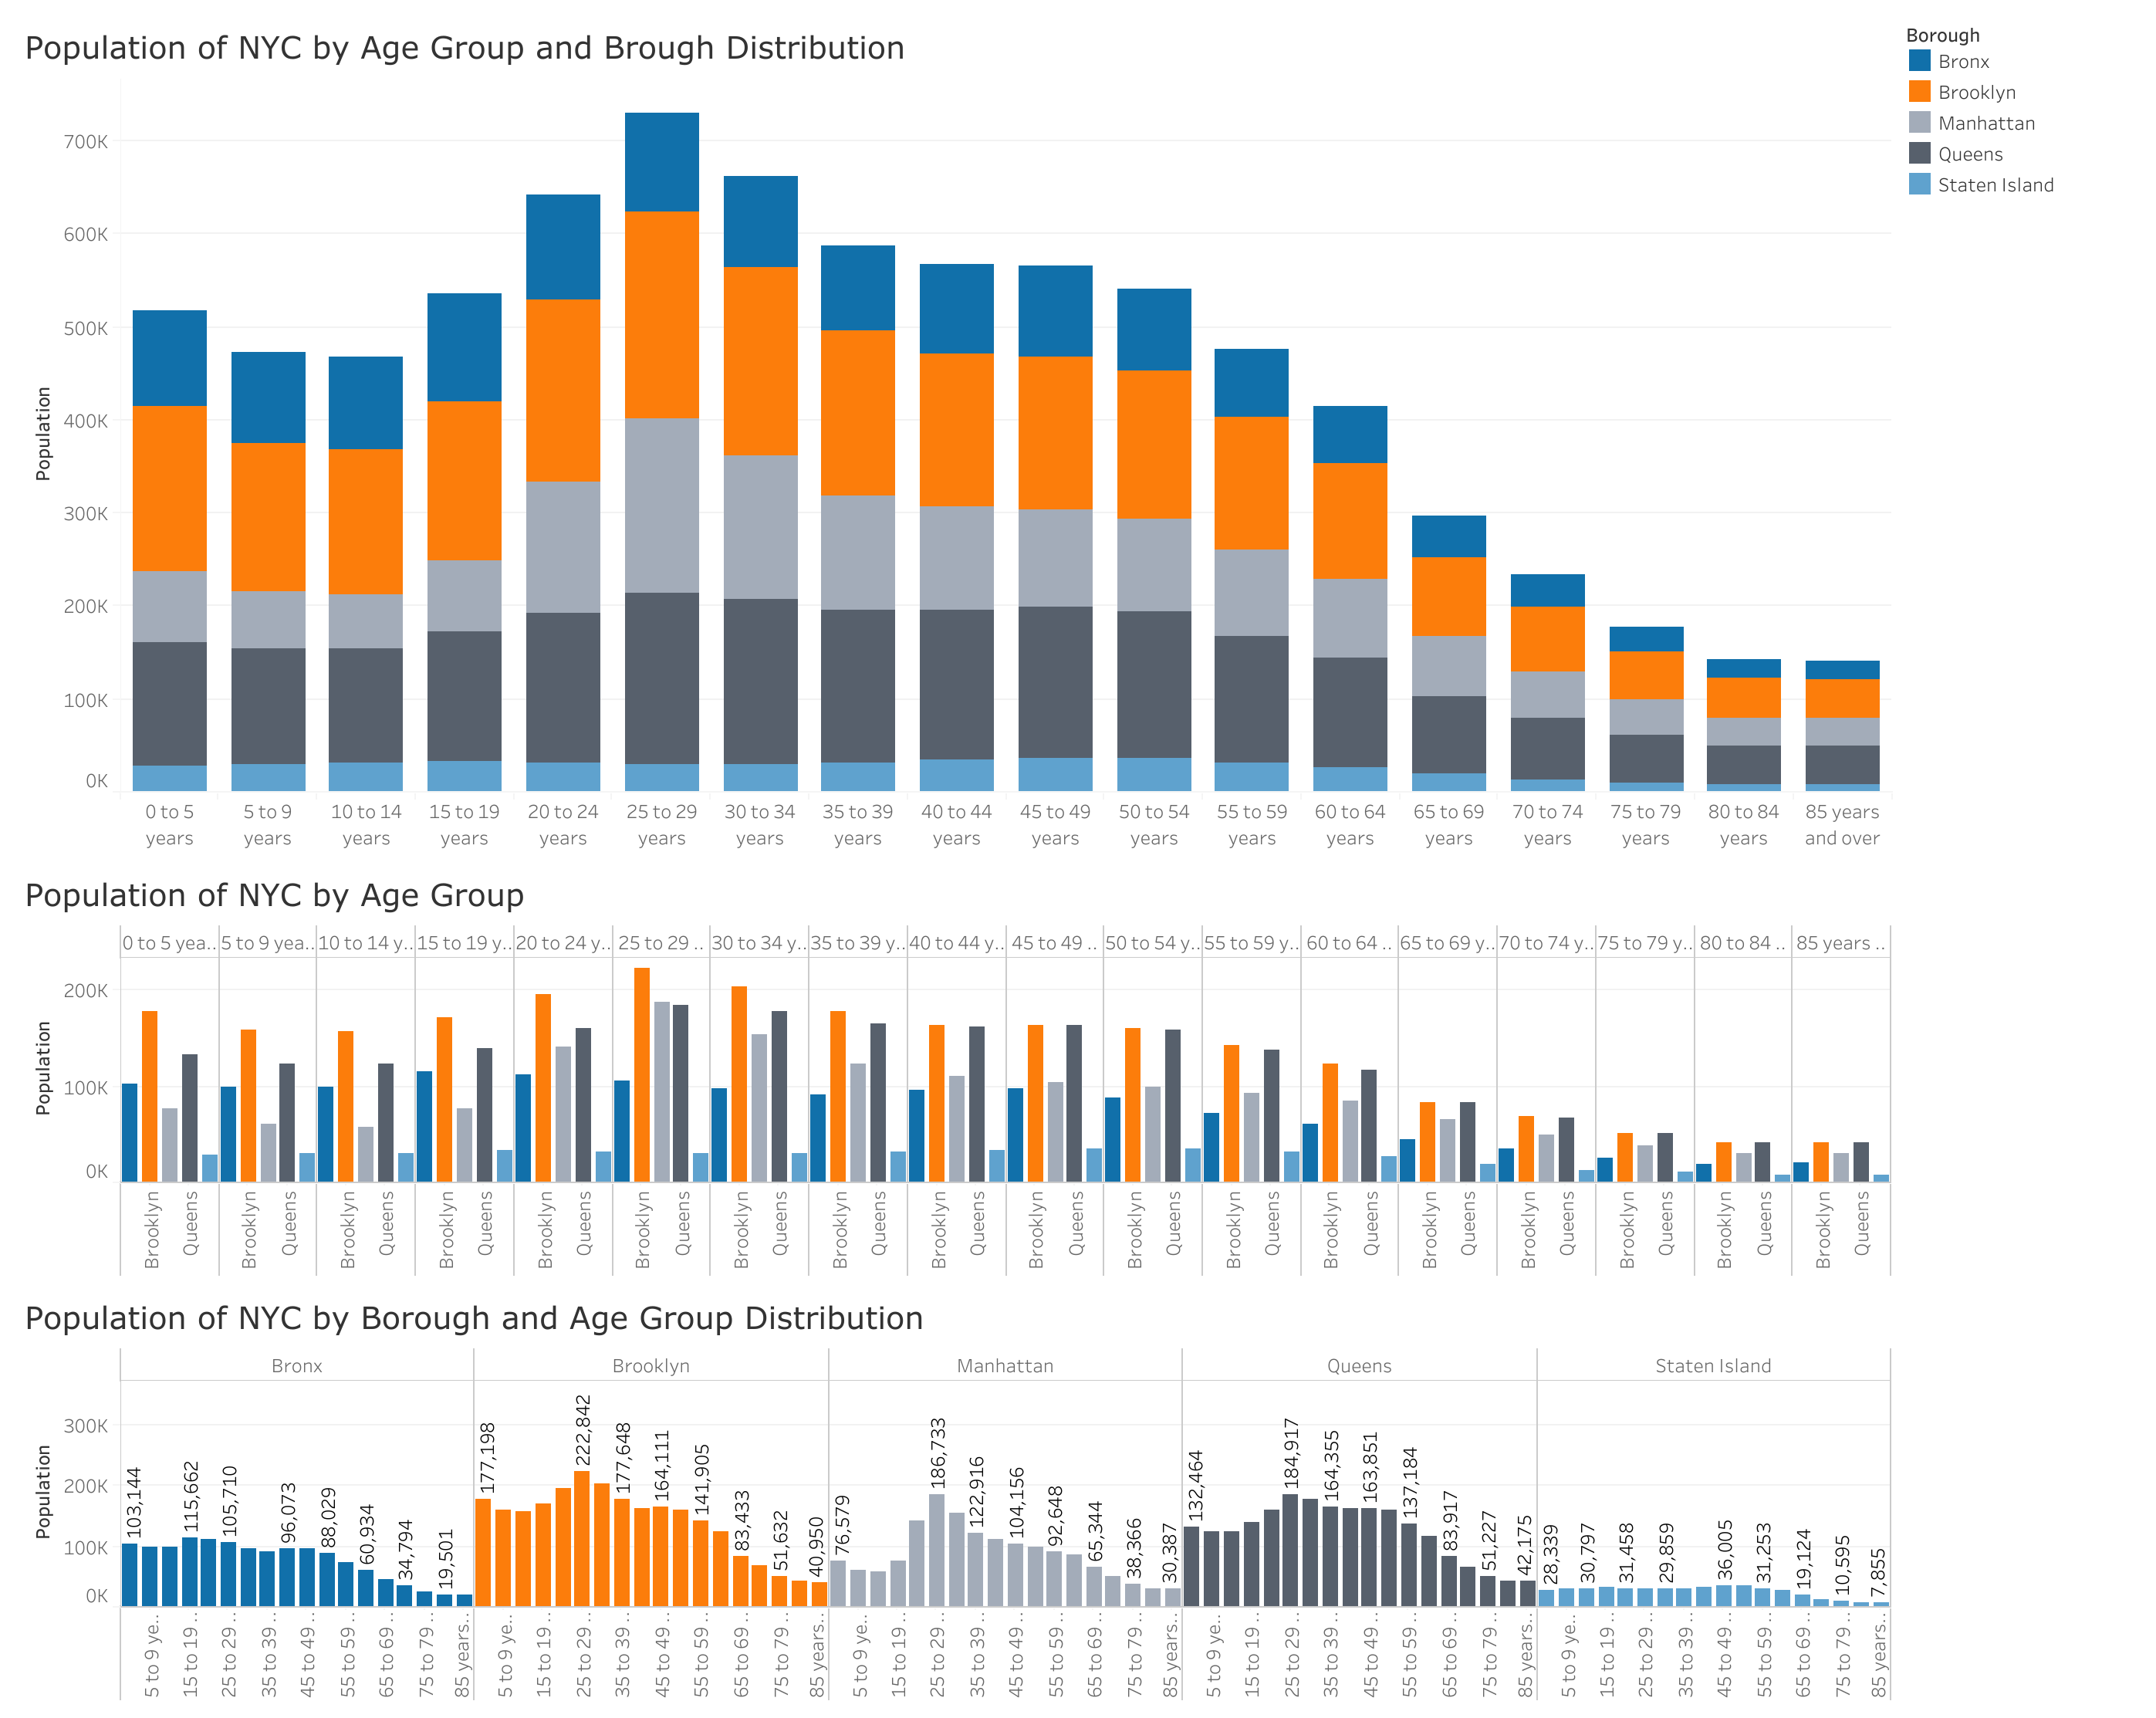 Dashboard: Visualizations of Population of NYC by Age Group and Brough Distribution